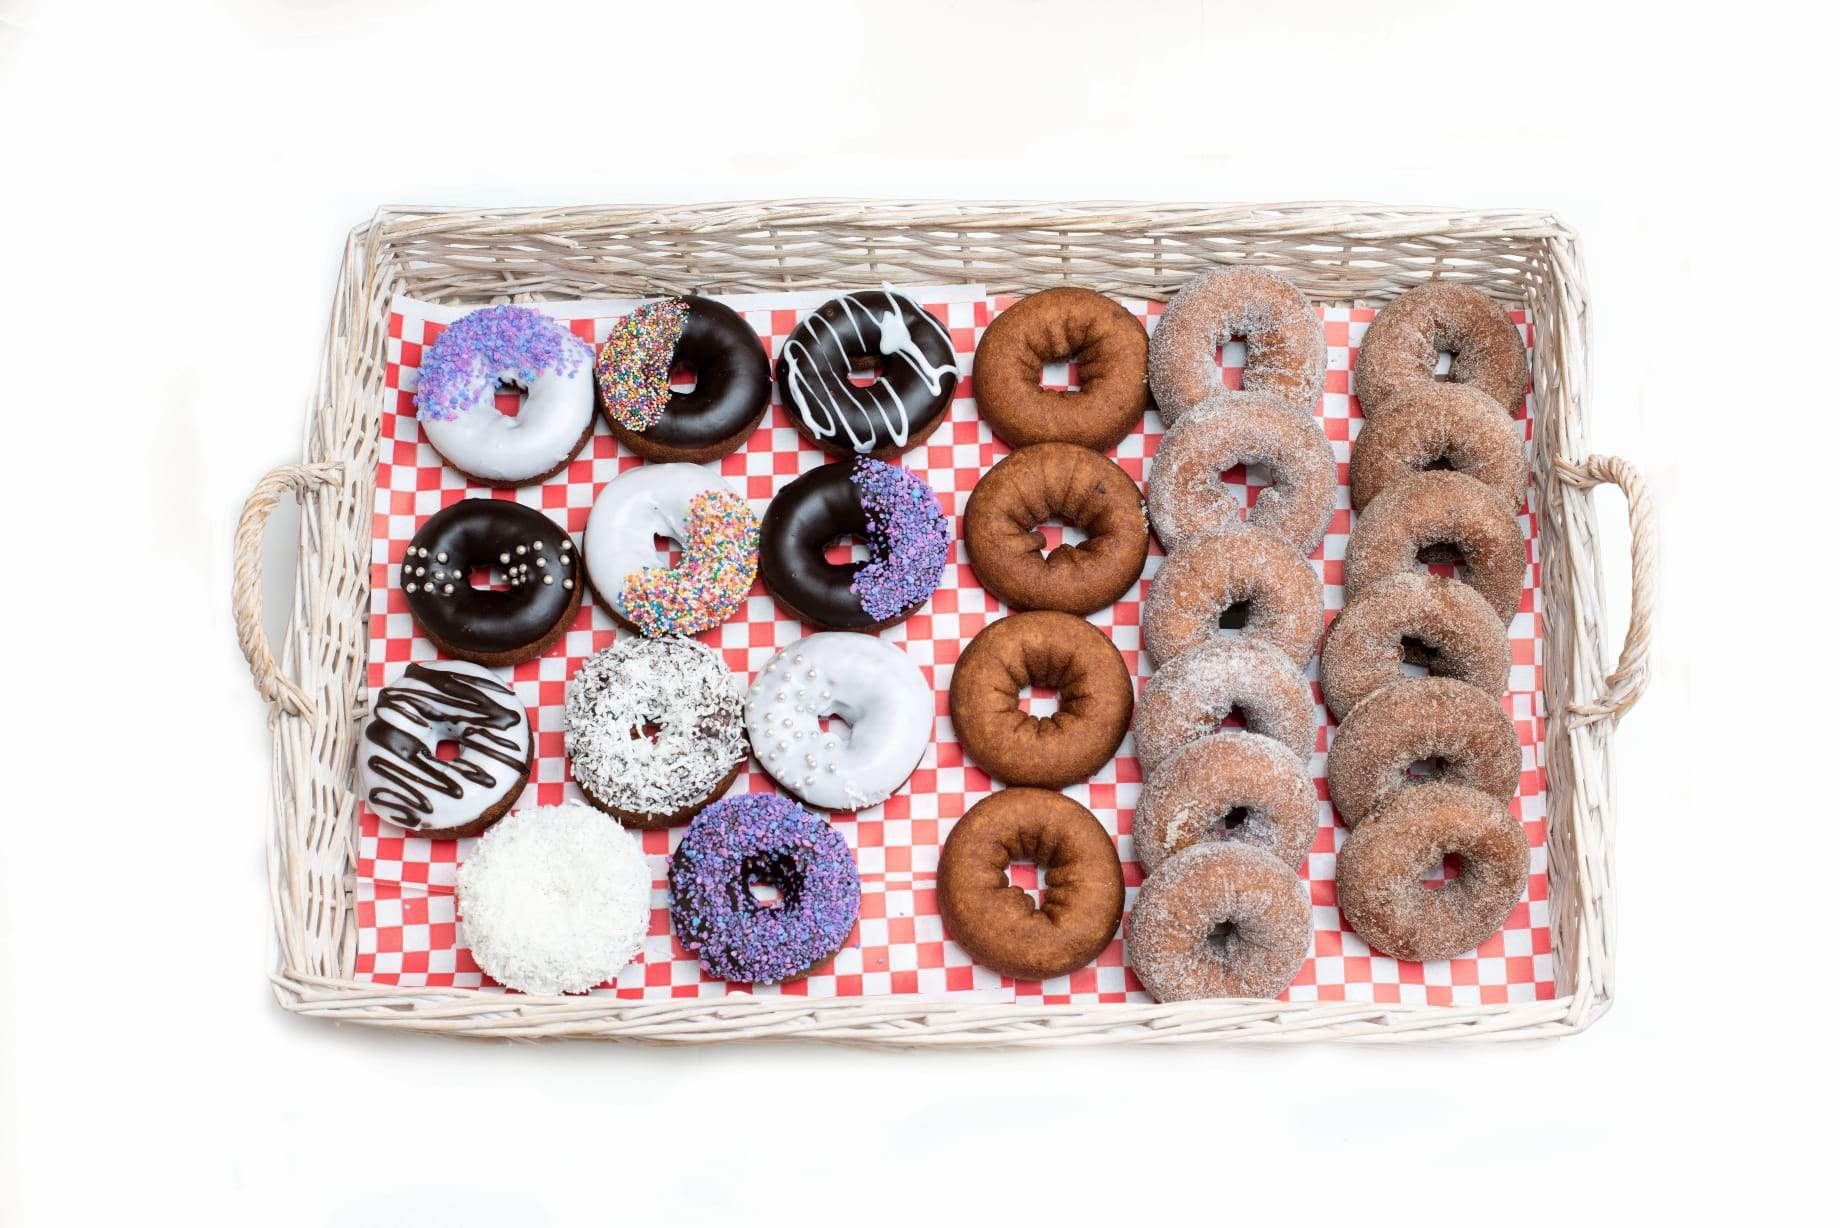 Crunchy, yum donuts available in packs of 6 or singles- Chocolate, sugar, plain, coconut, sprinkle